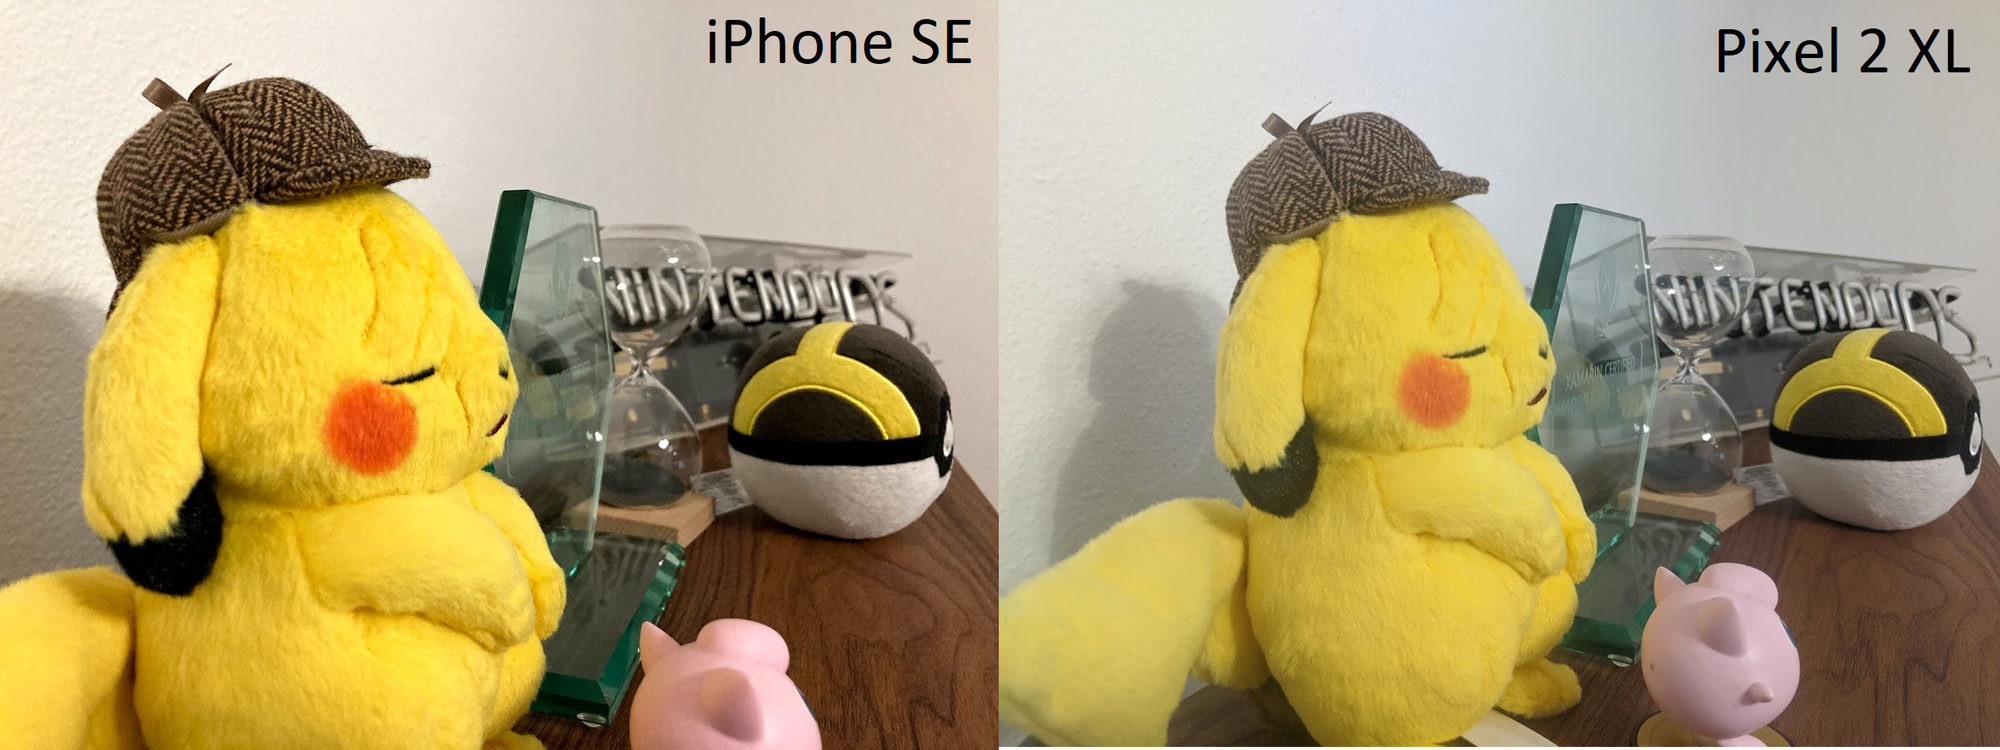 Side by side iPhone SE vs Pixel 2 XL pictures of Pikachu, pokeball, and neon sign on wood